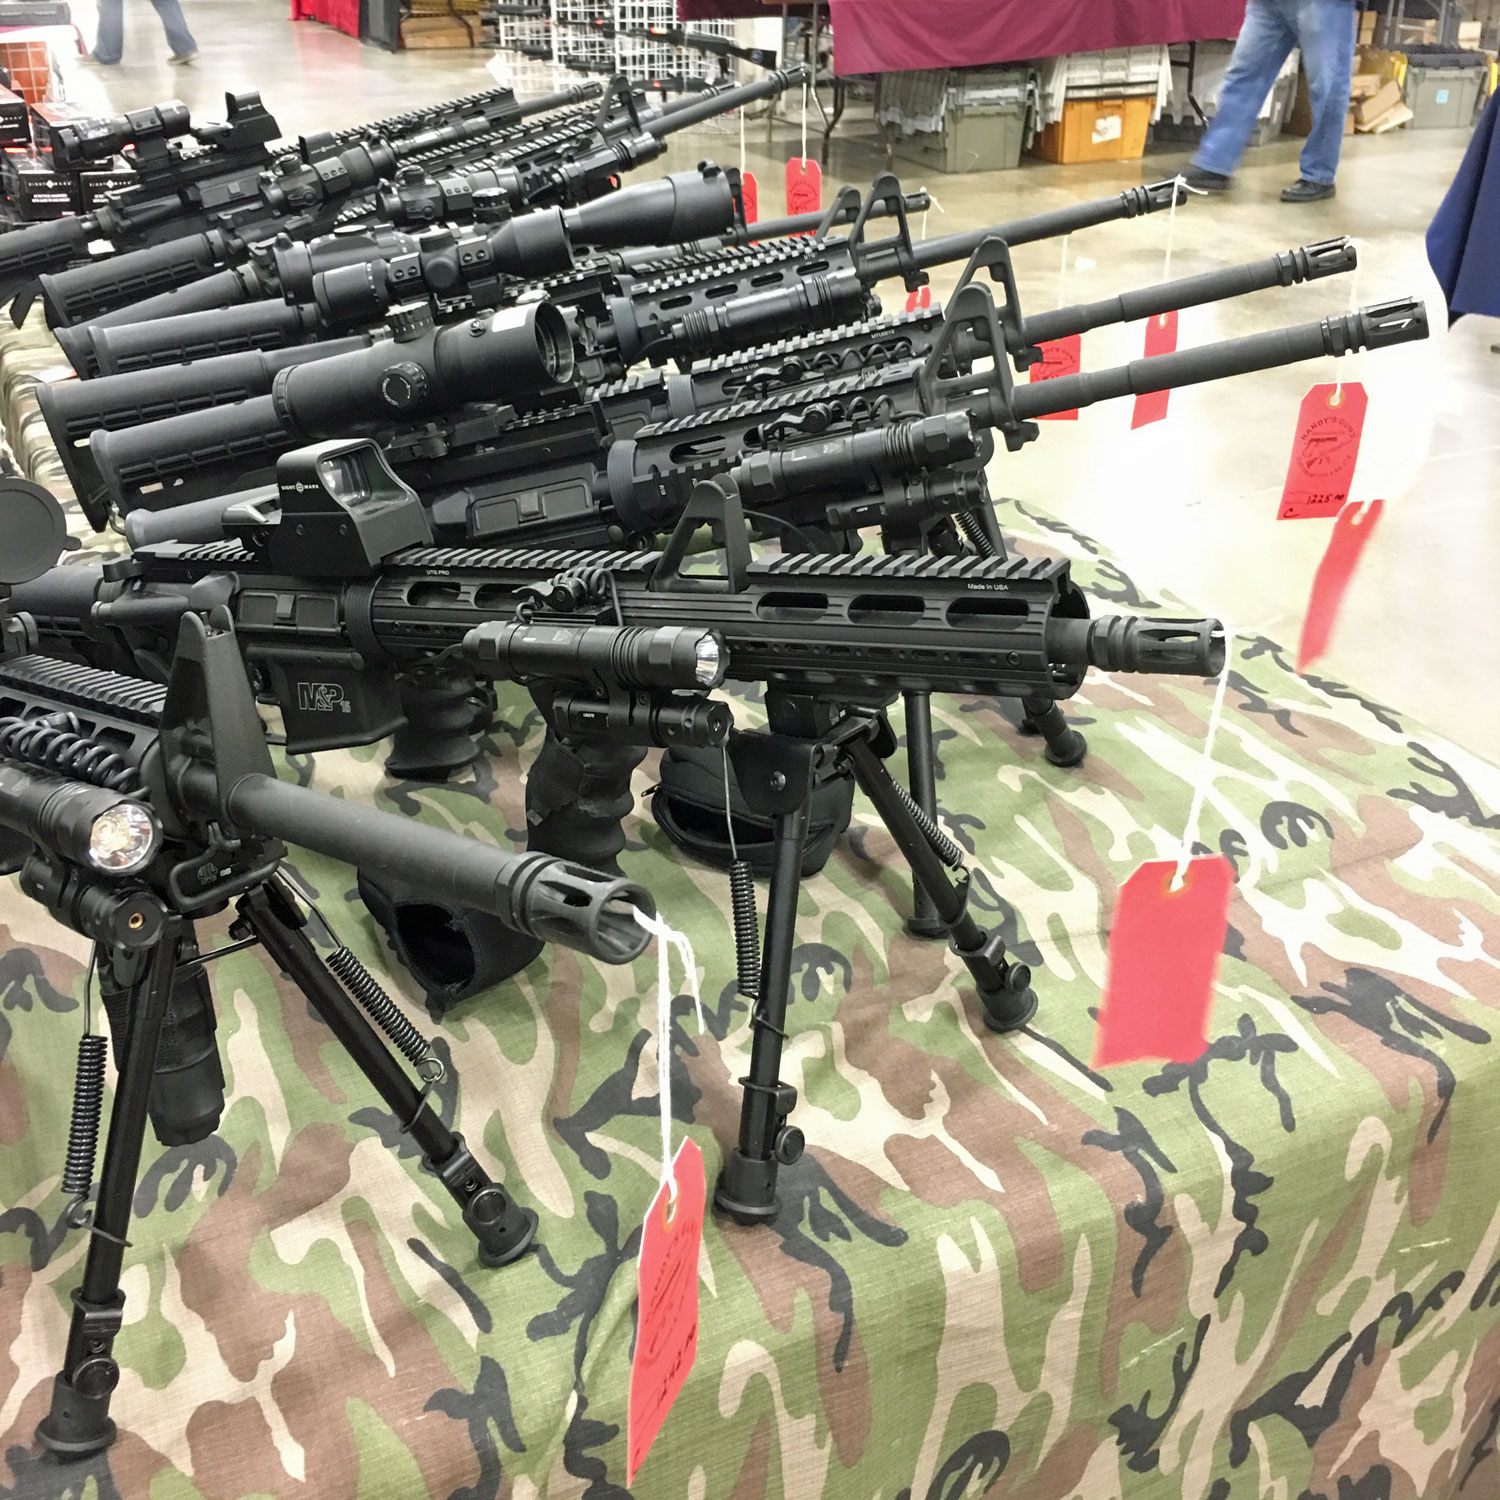 What to Expect at a Gun Show